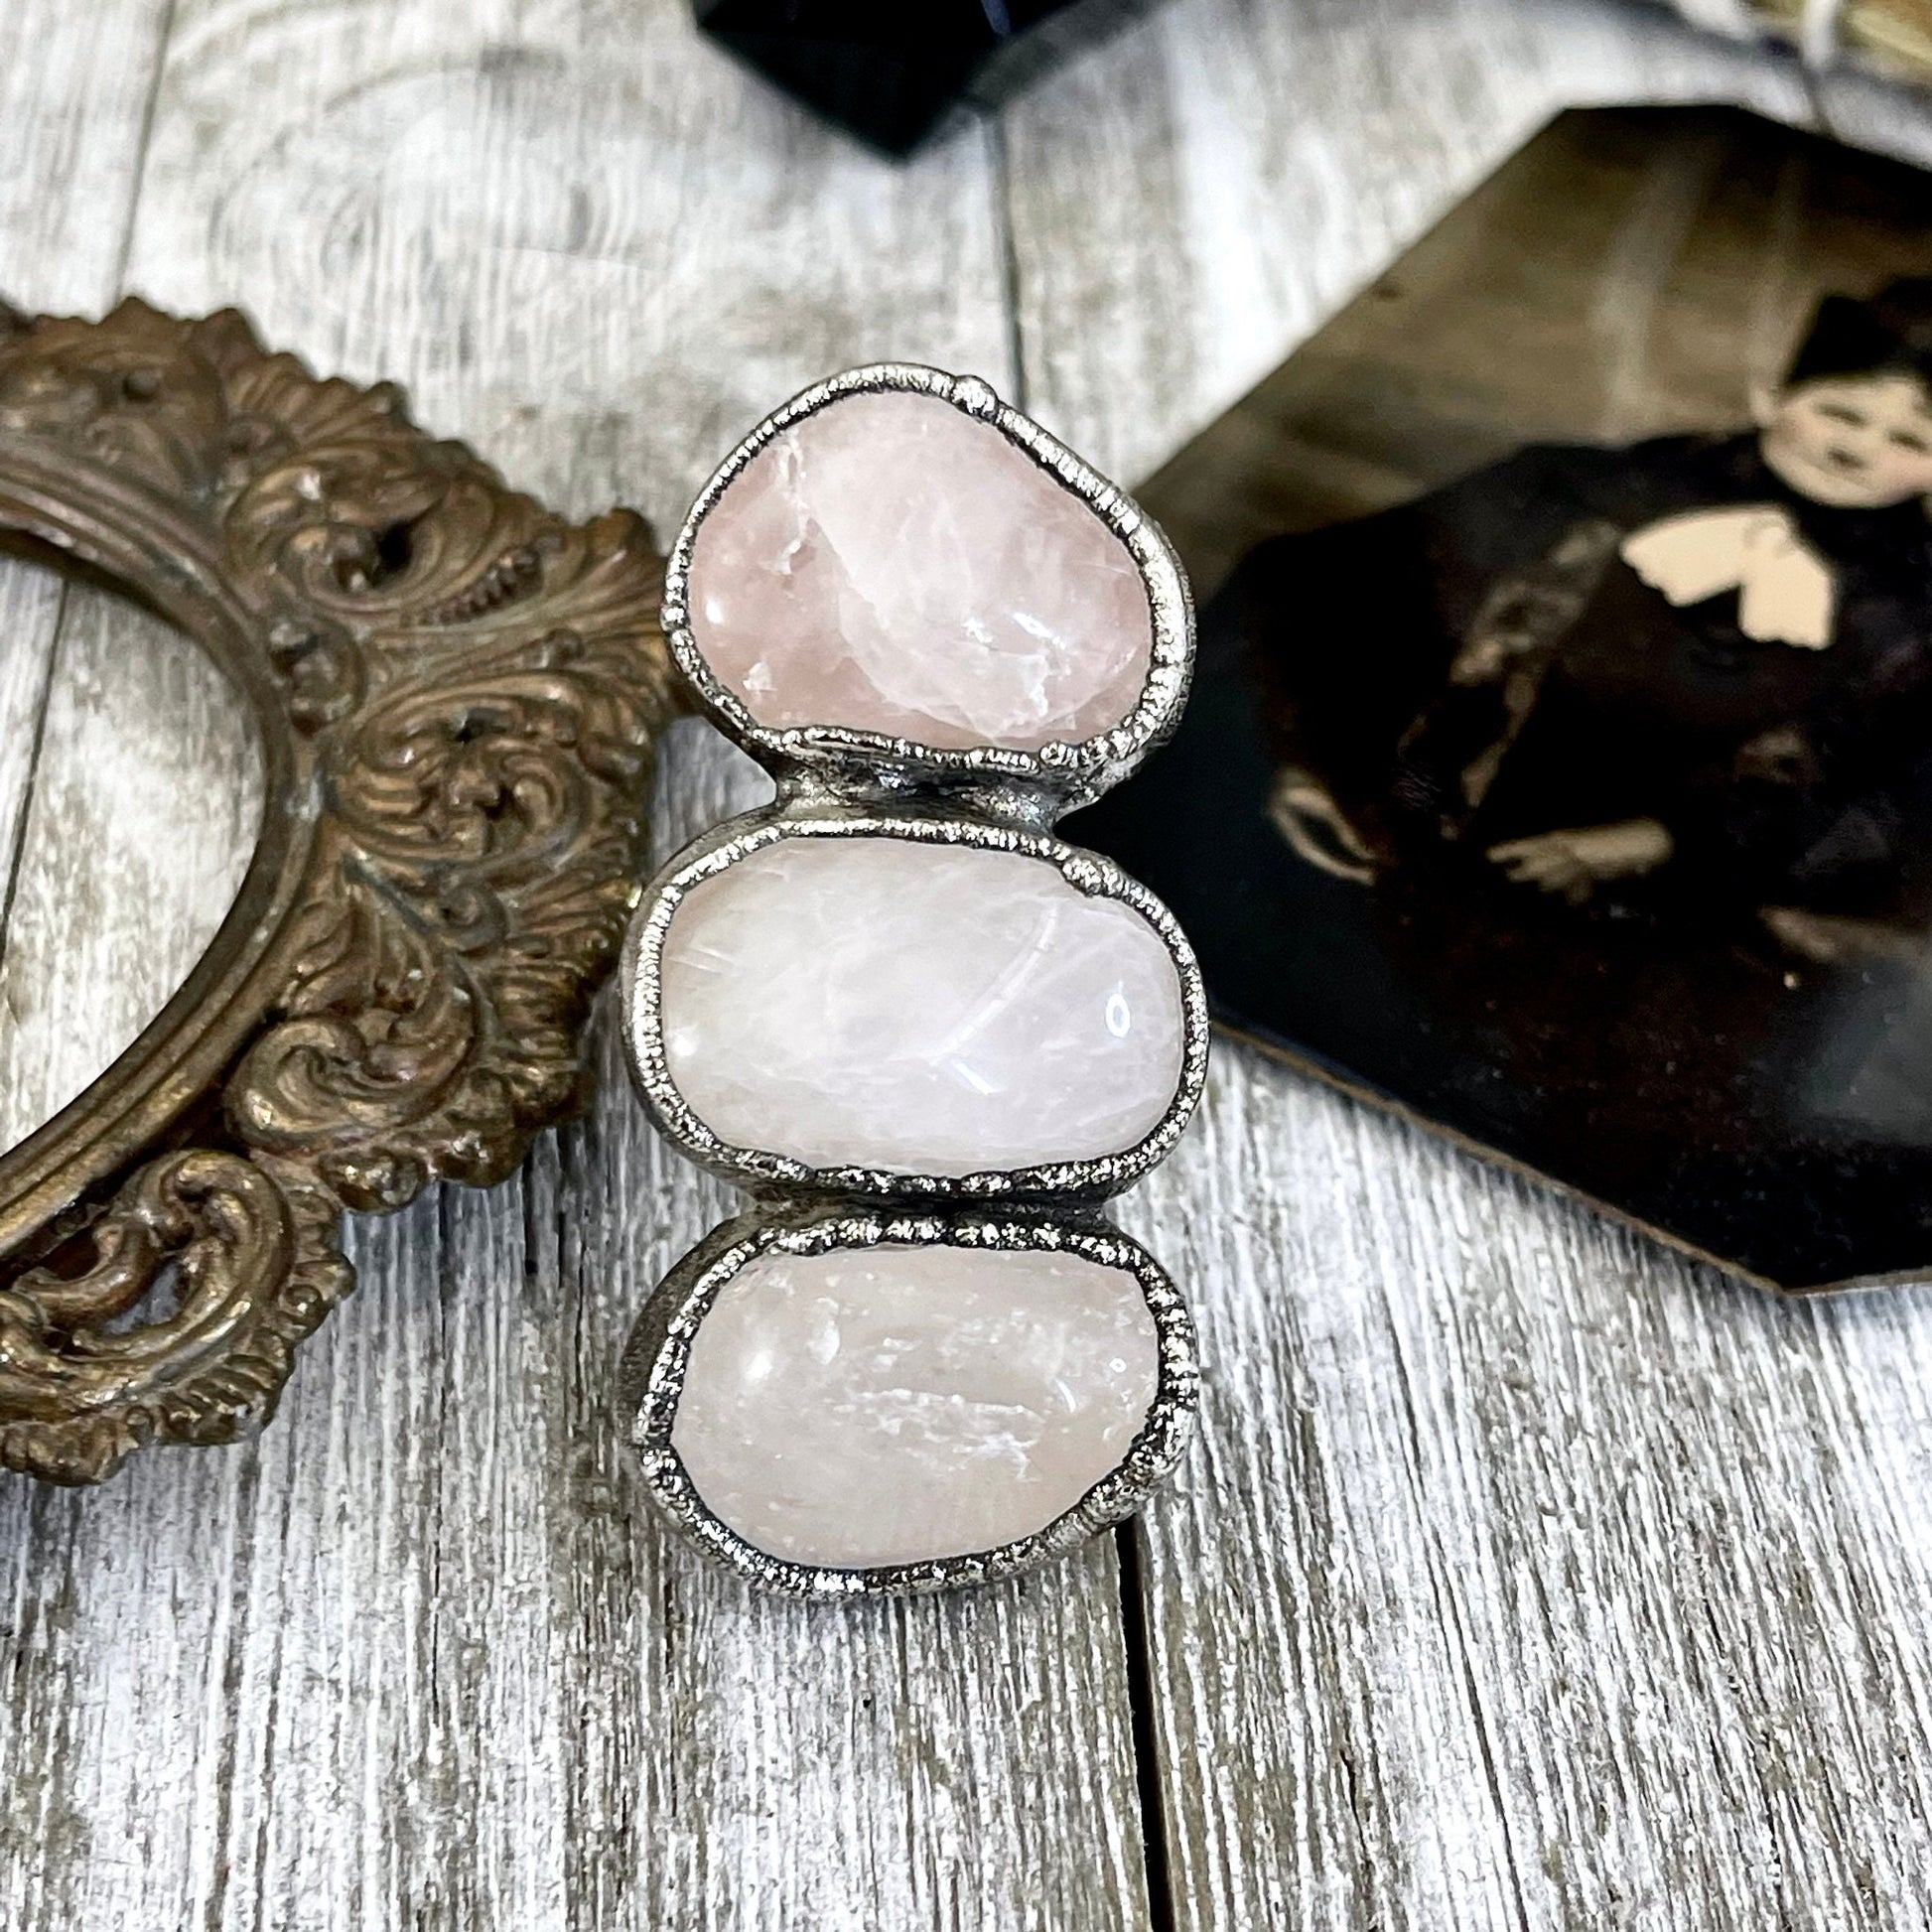 Size 9.5 Crystal Ring - Three Stone Pink Rose Quartz Ring in Silver / Foxlark Collection - One of a Kind / Big Boho Crystal Jewelry